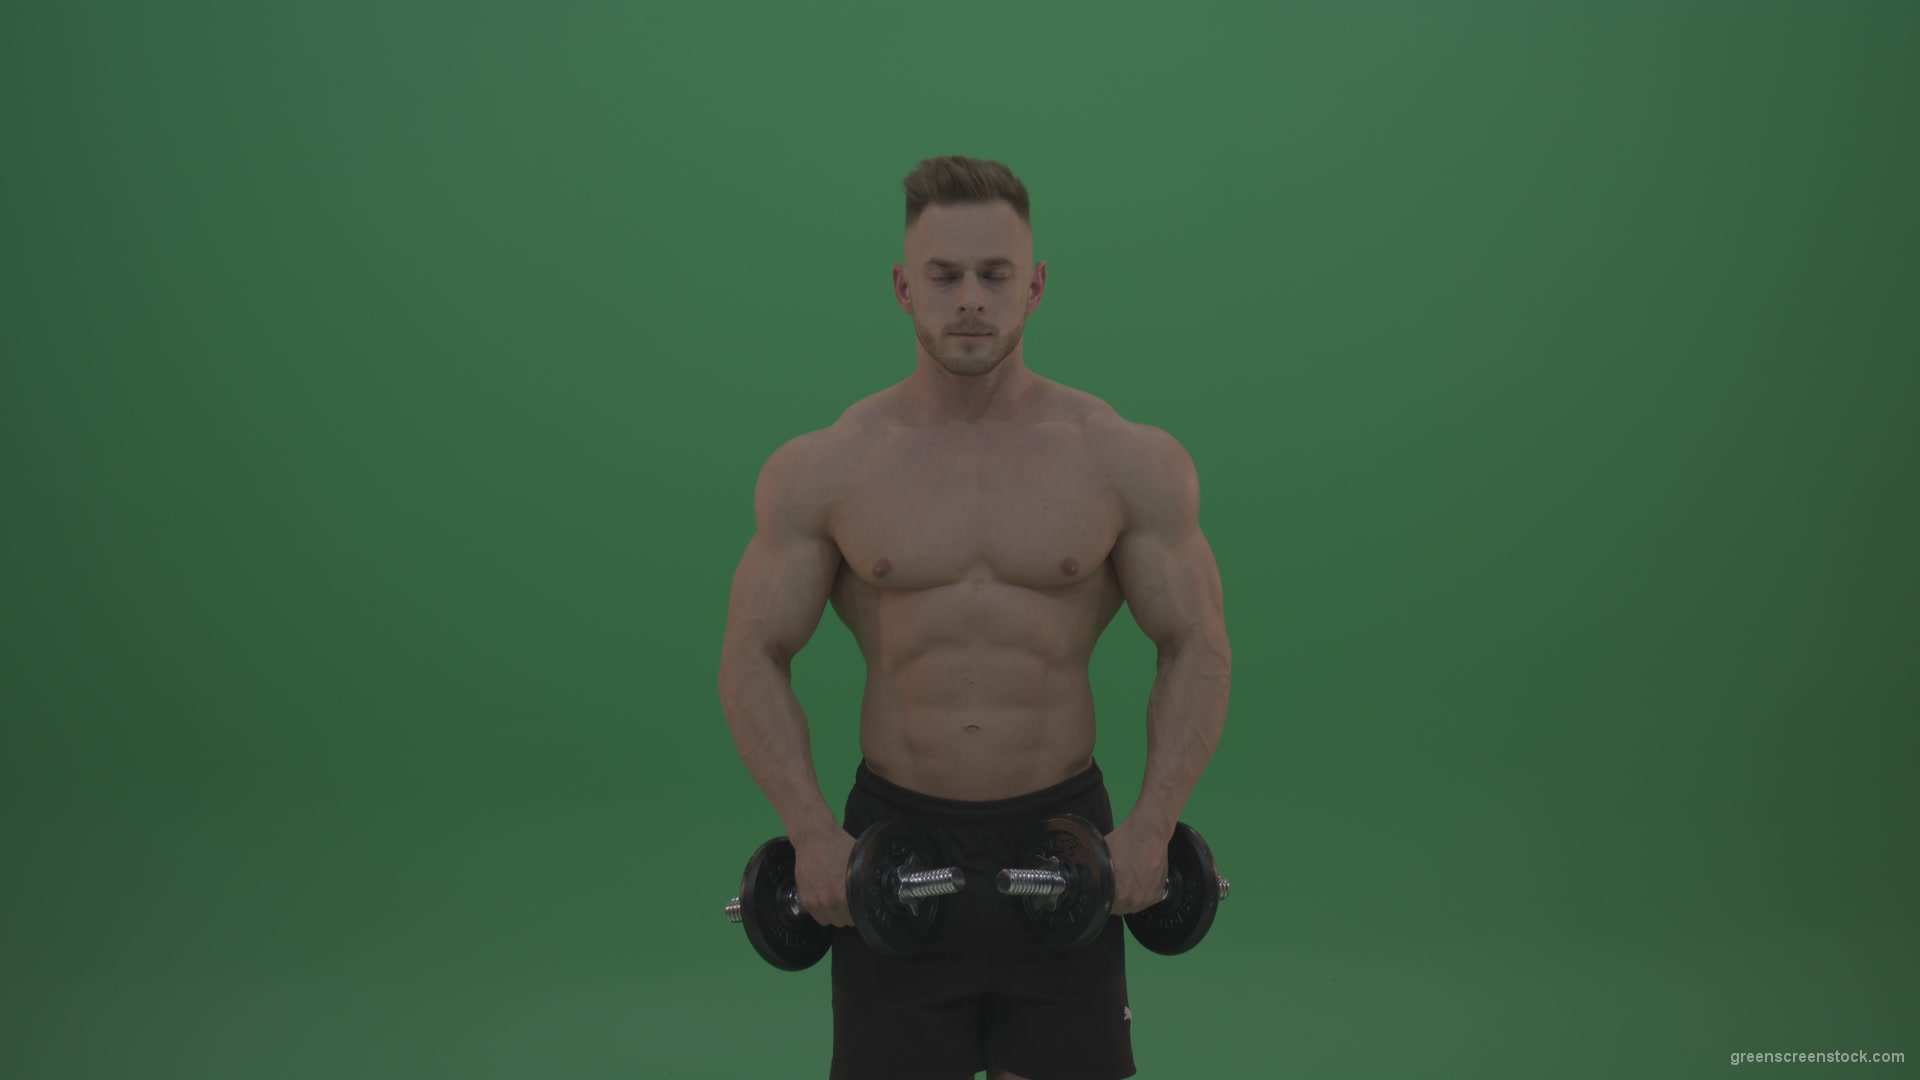 Young_Bodybuilder_Working_Out_With_Two_Handed_Dumbbell_Biceps_Exercises_On_Green_Screen_Wall_Background_001 Green Screen Stock